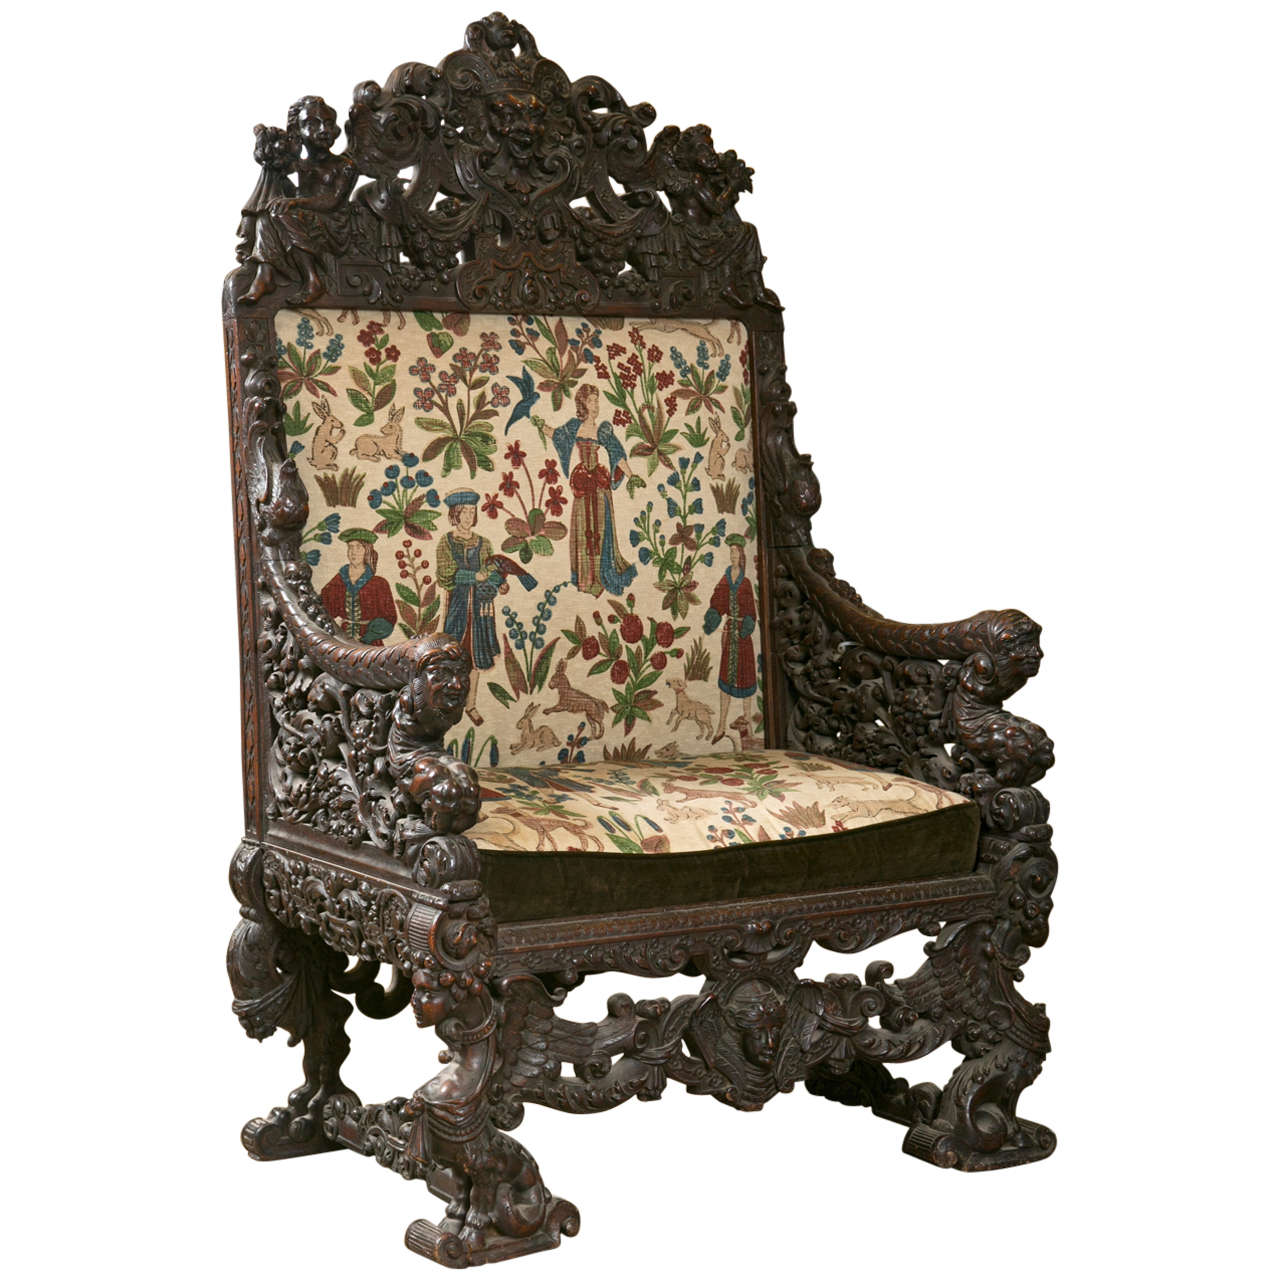 Antique Oversized Carved Medieval Throne Chair At 1stdibs